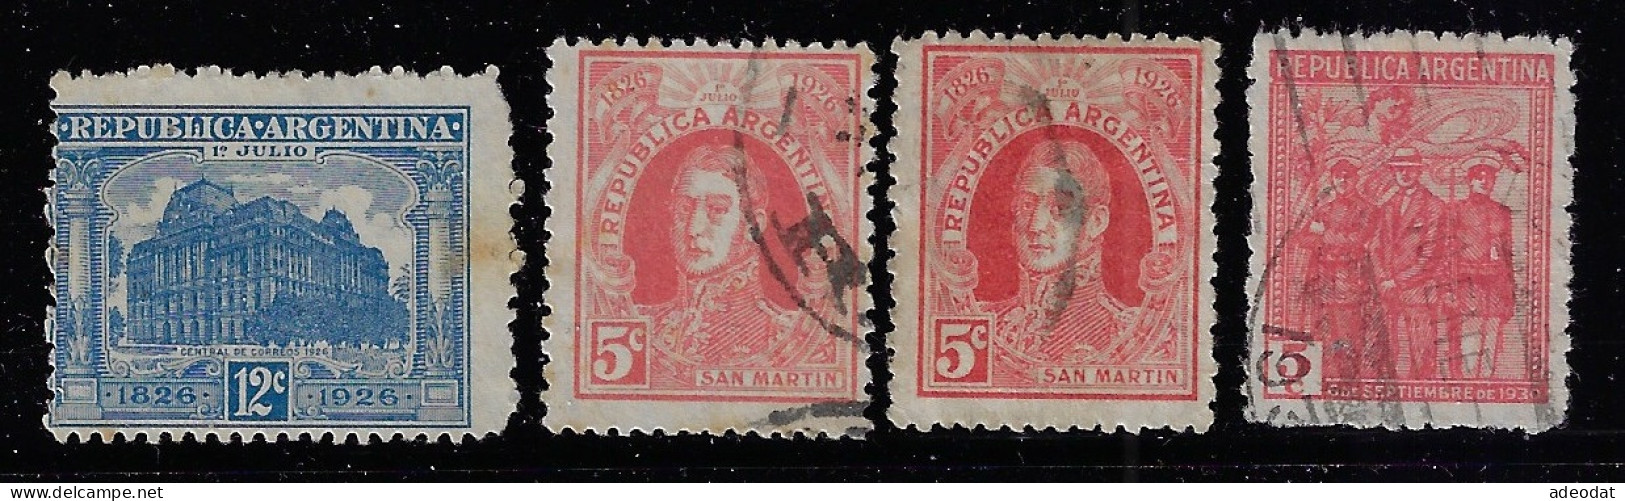 ARGENTINA  1926  SCOTT #359(2),360,379 USED - Used Stamps